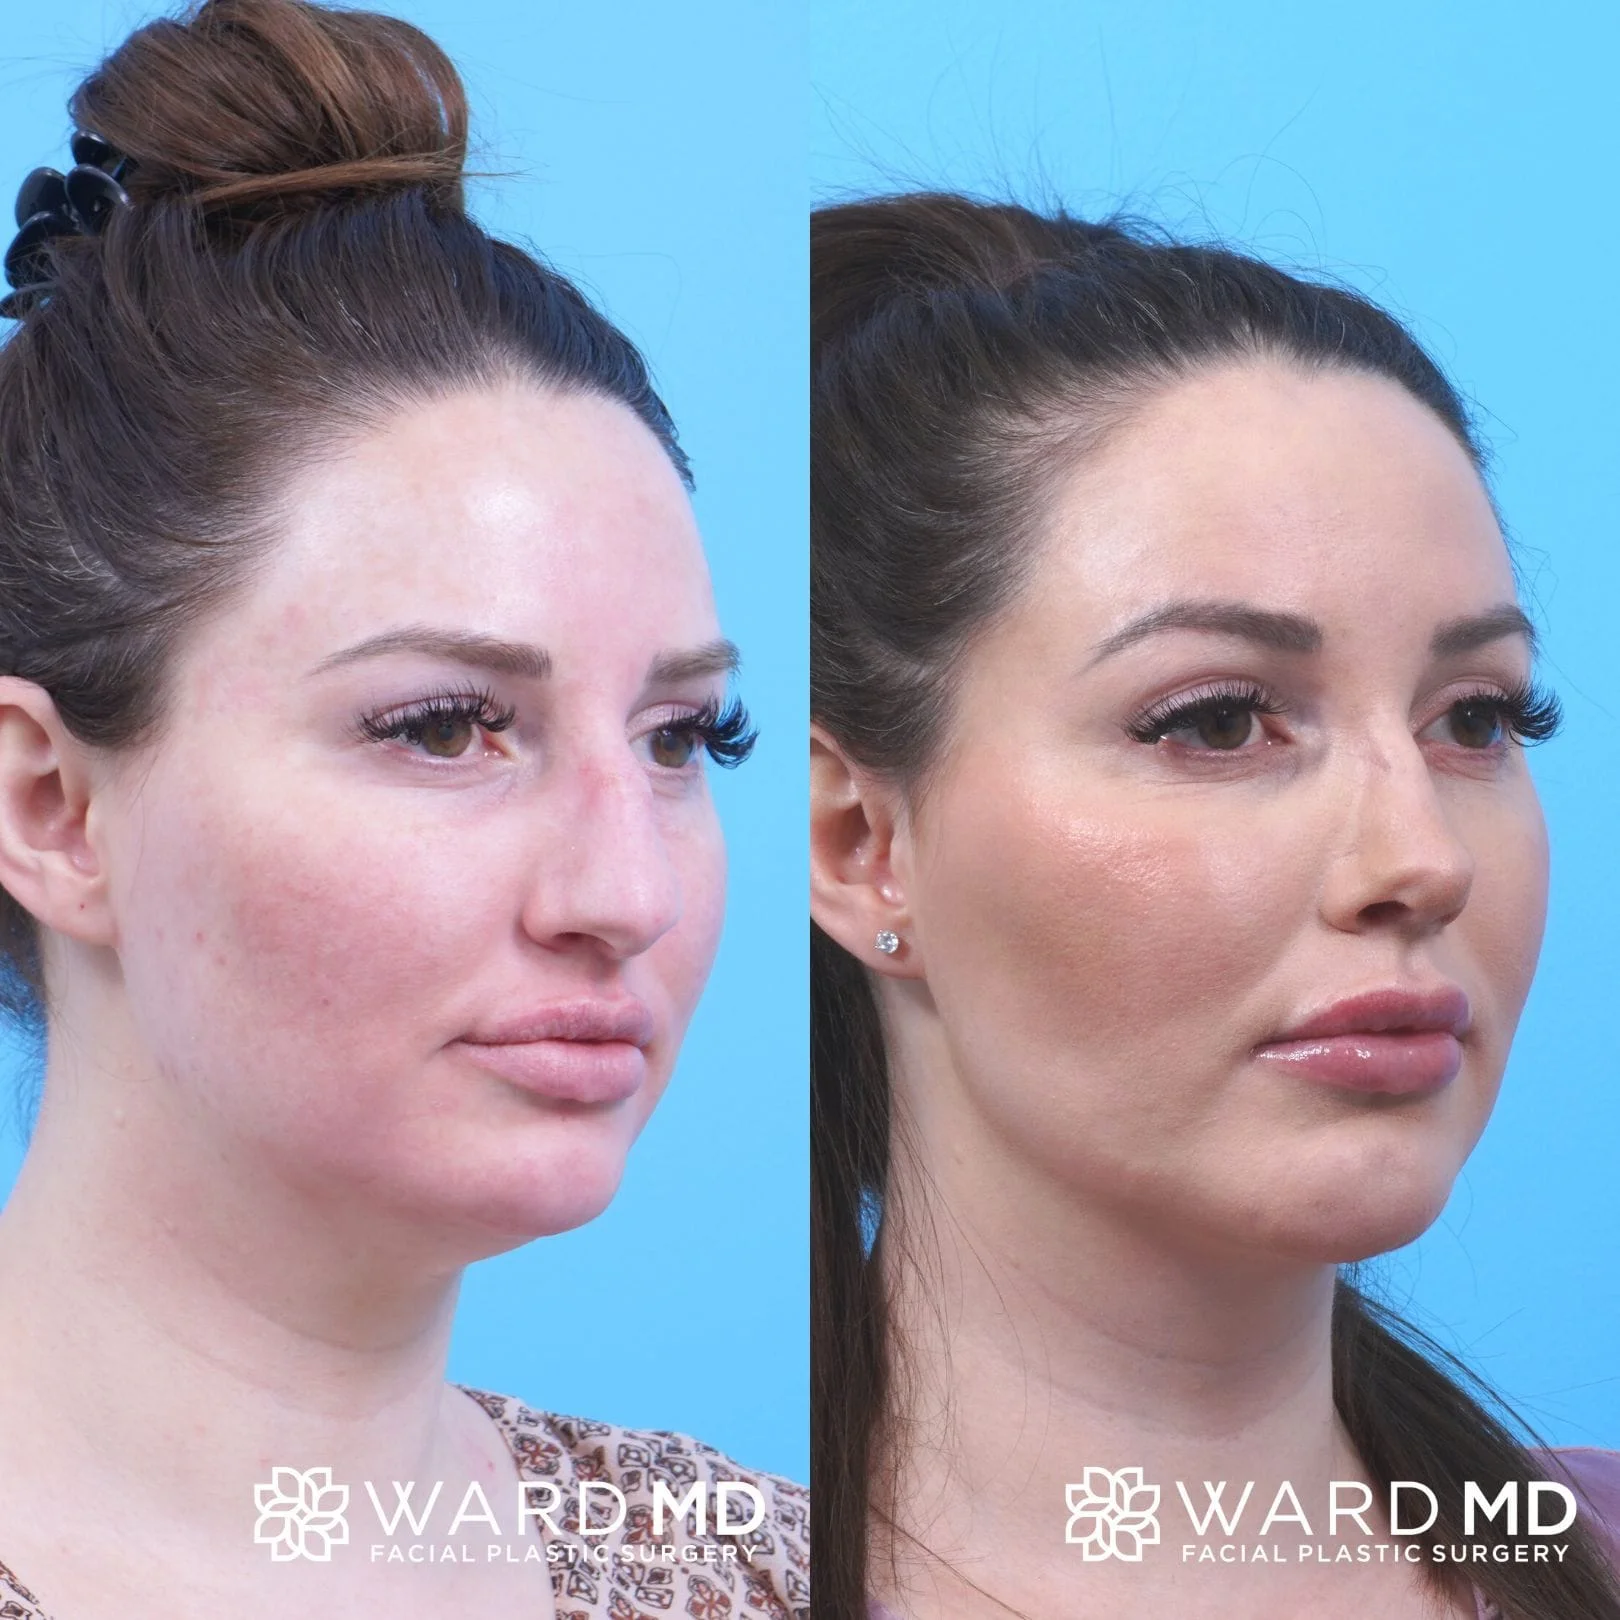 Facial contouring before and after image.